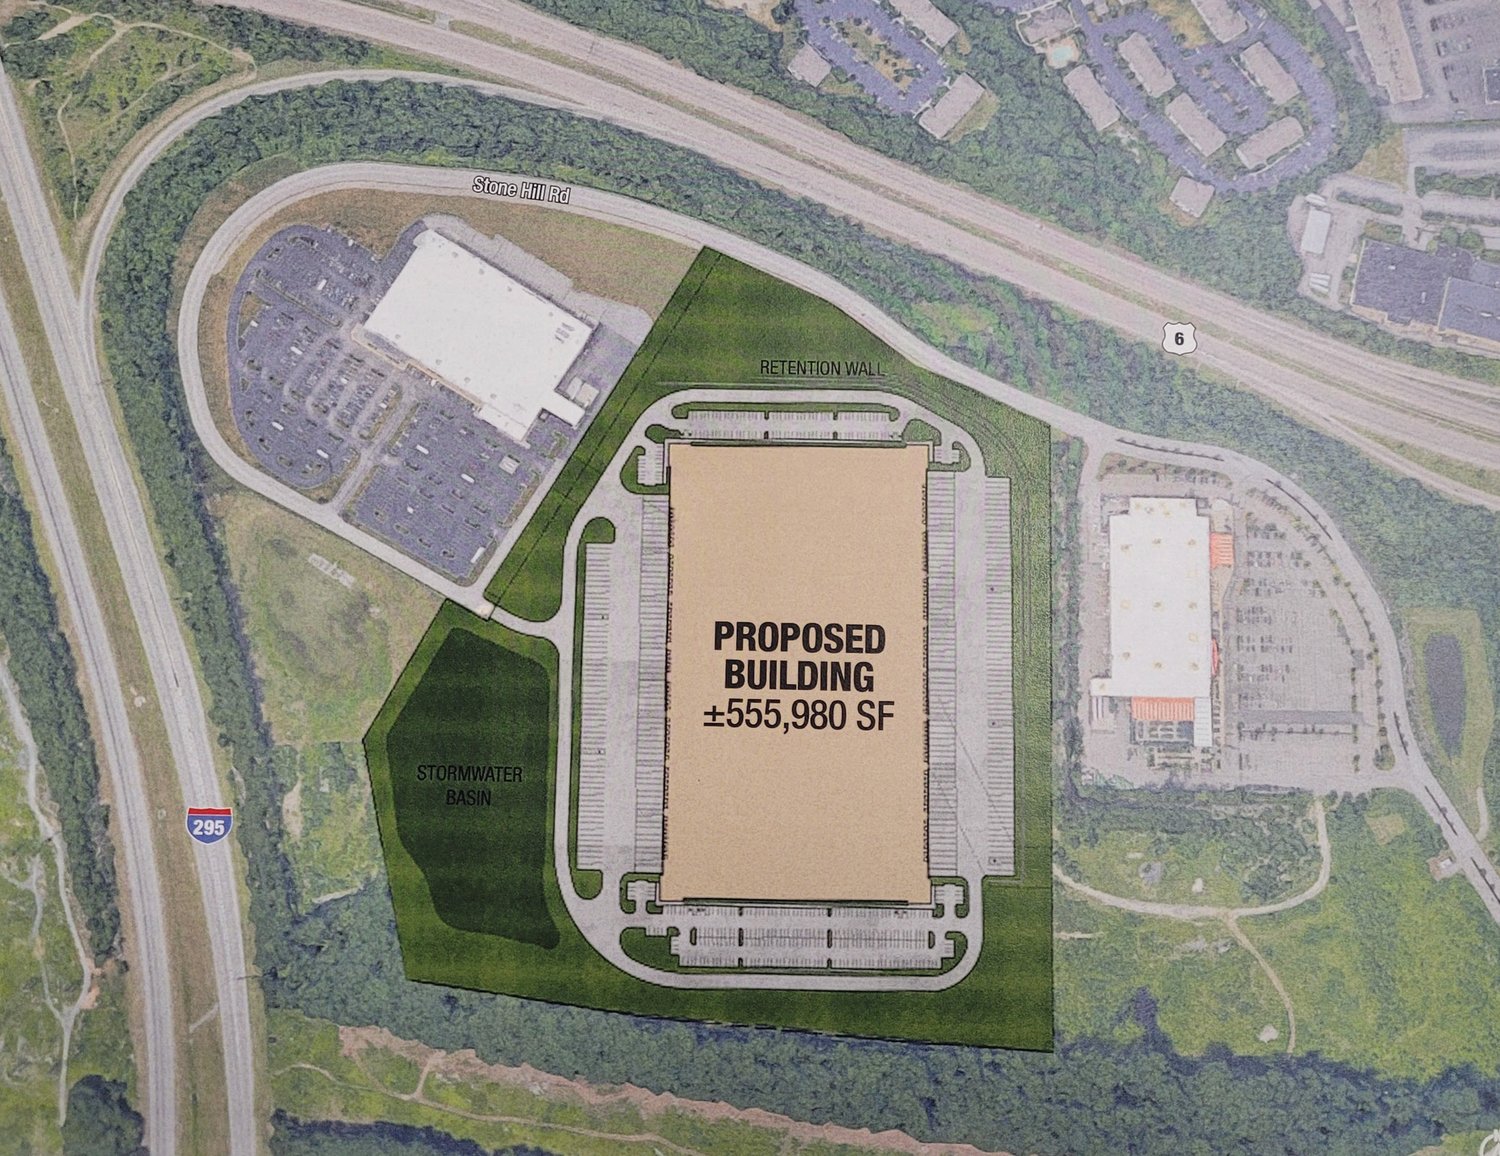 THE SITE: NorthPoint Development hopes to build the “I-295 Commerce Center,” a $75 million, 555,980 square foot warehouse facility off Stonehill Drive, between the Home Depot and the BJ’s Wholesale Club in Johnston.